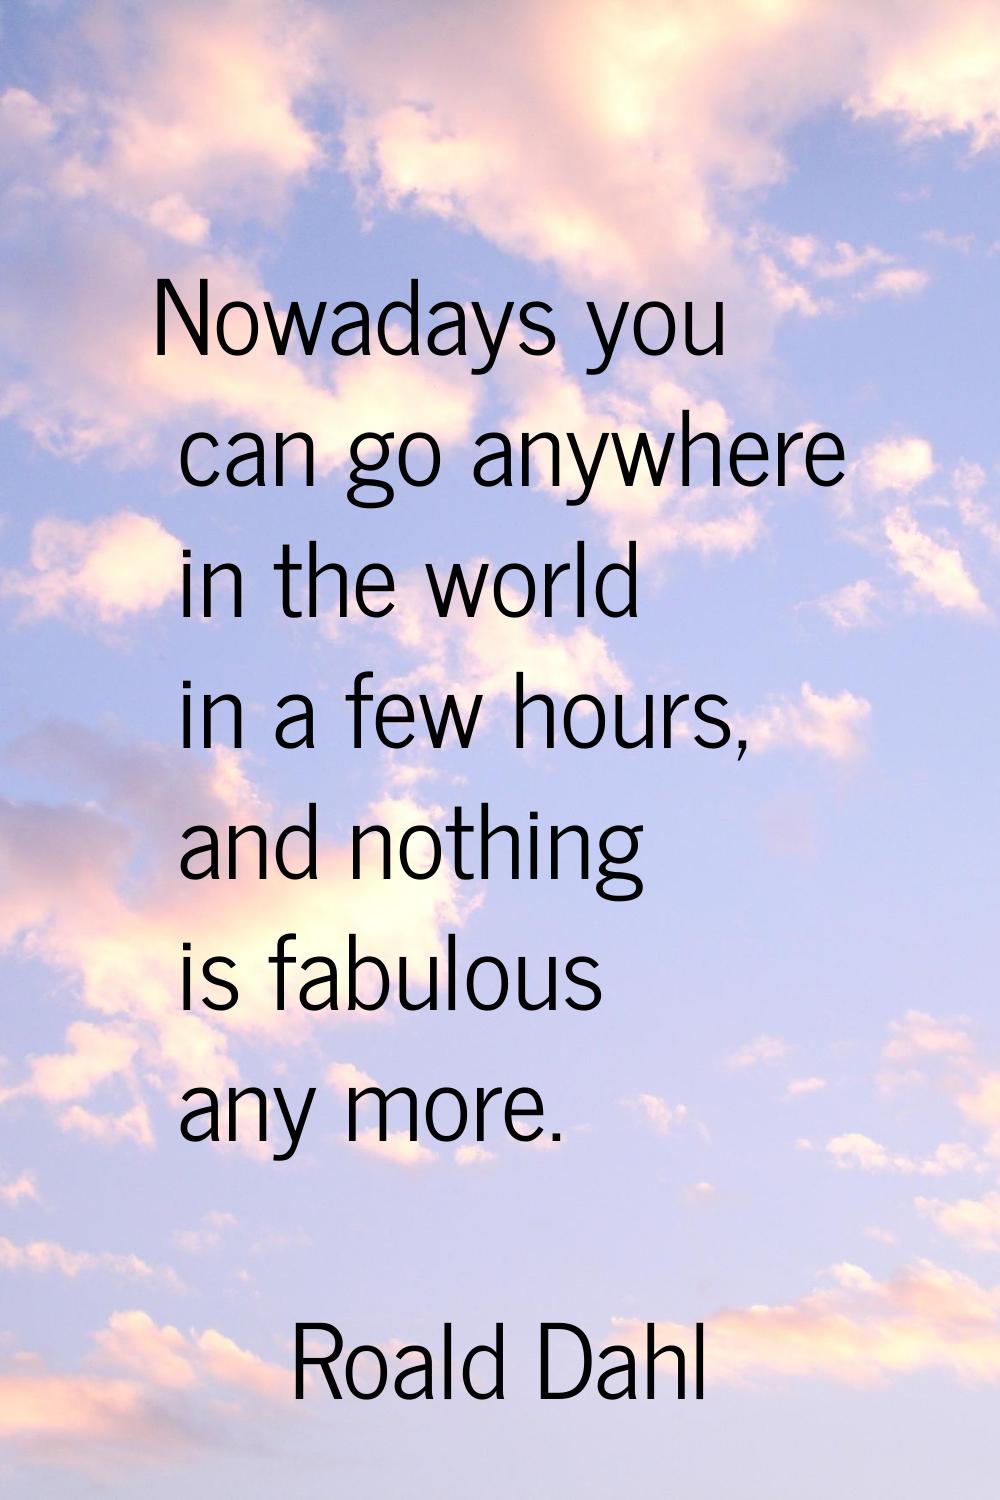 Nowadays you can go anywhere in the world in a few hours, and nothing is fabulous any more.